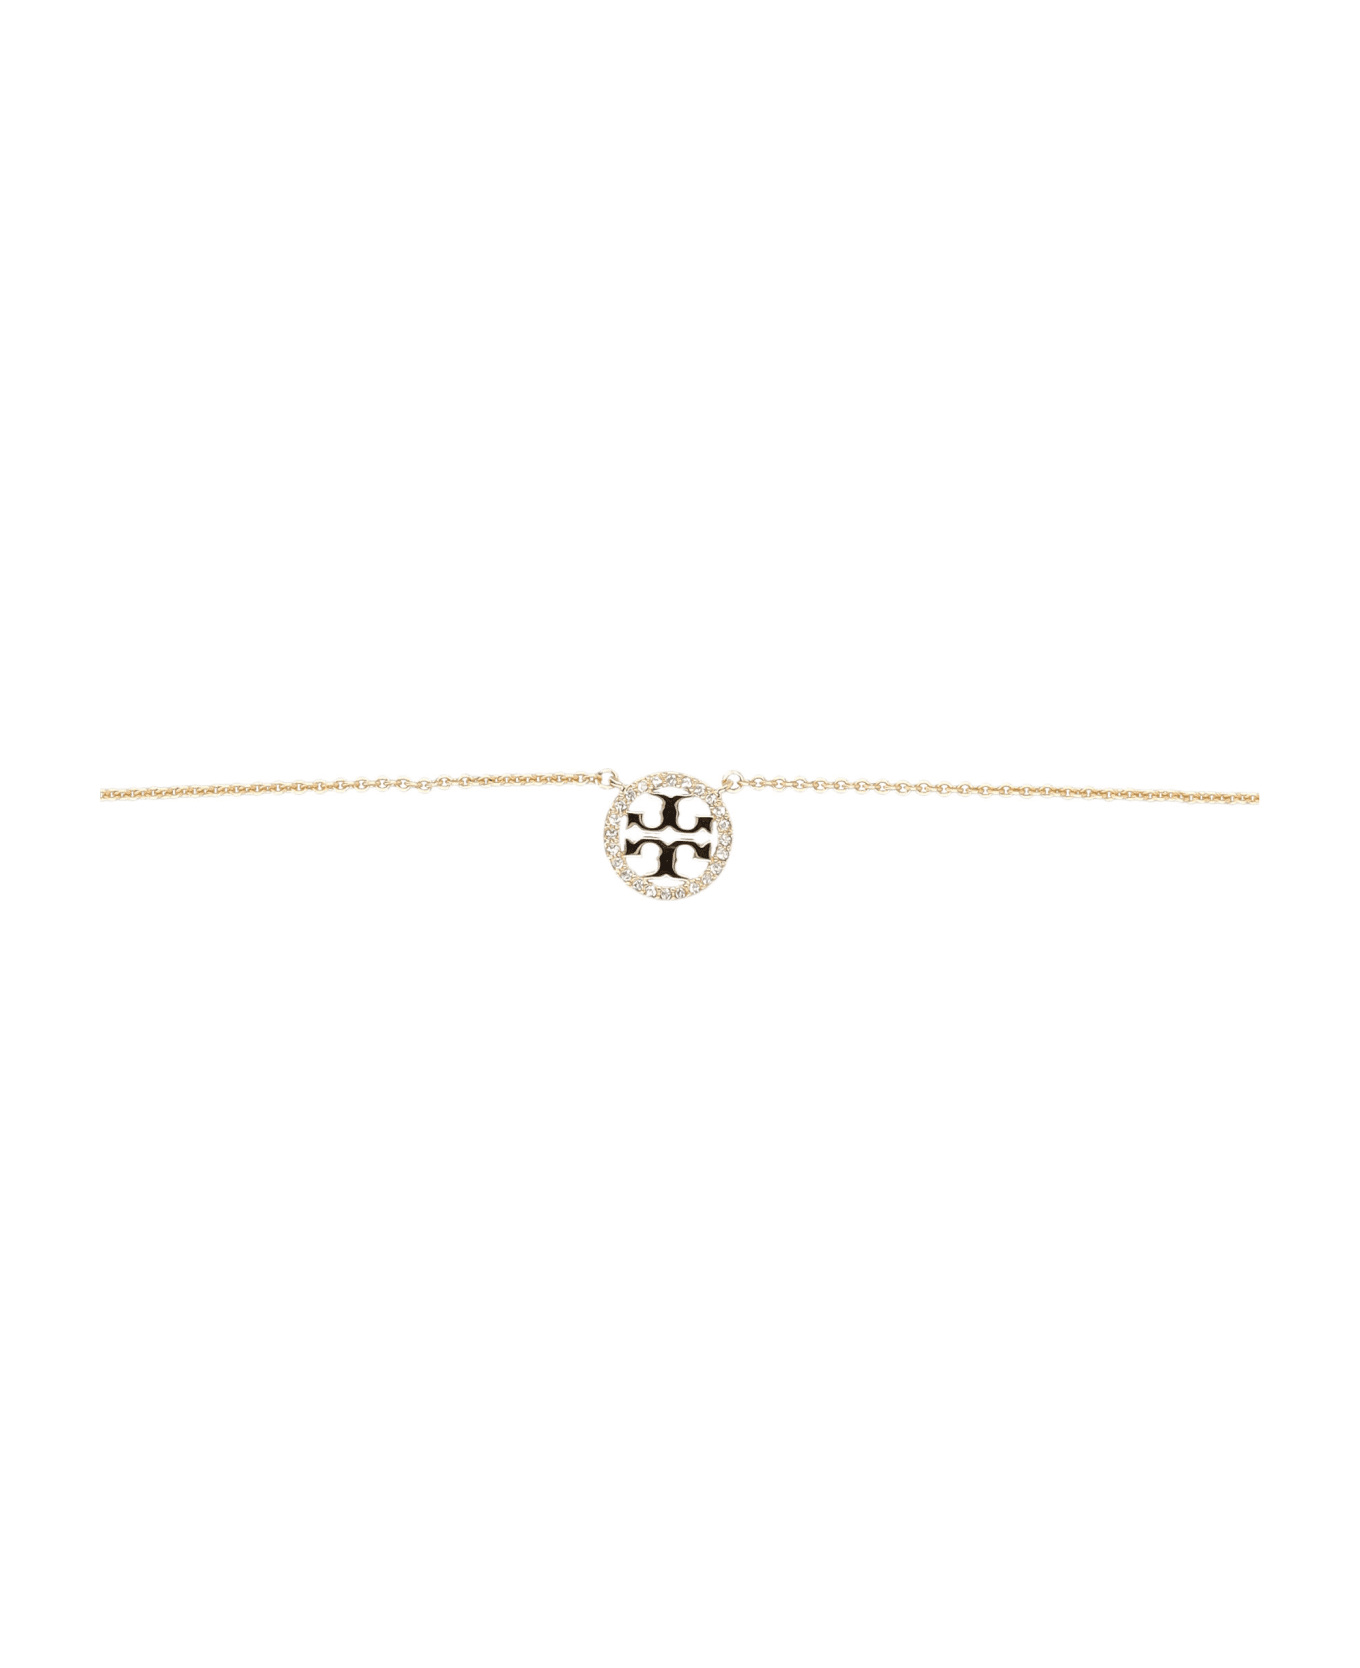 Tory Burch Miller Pave Pendant Necklace - Tory Gold / Crystal